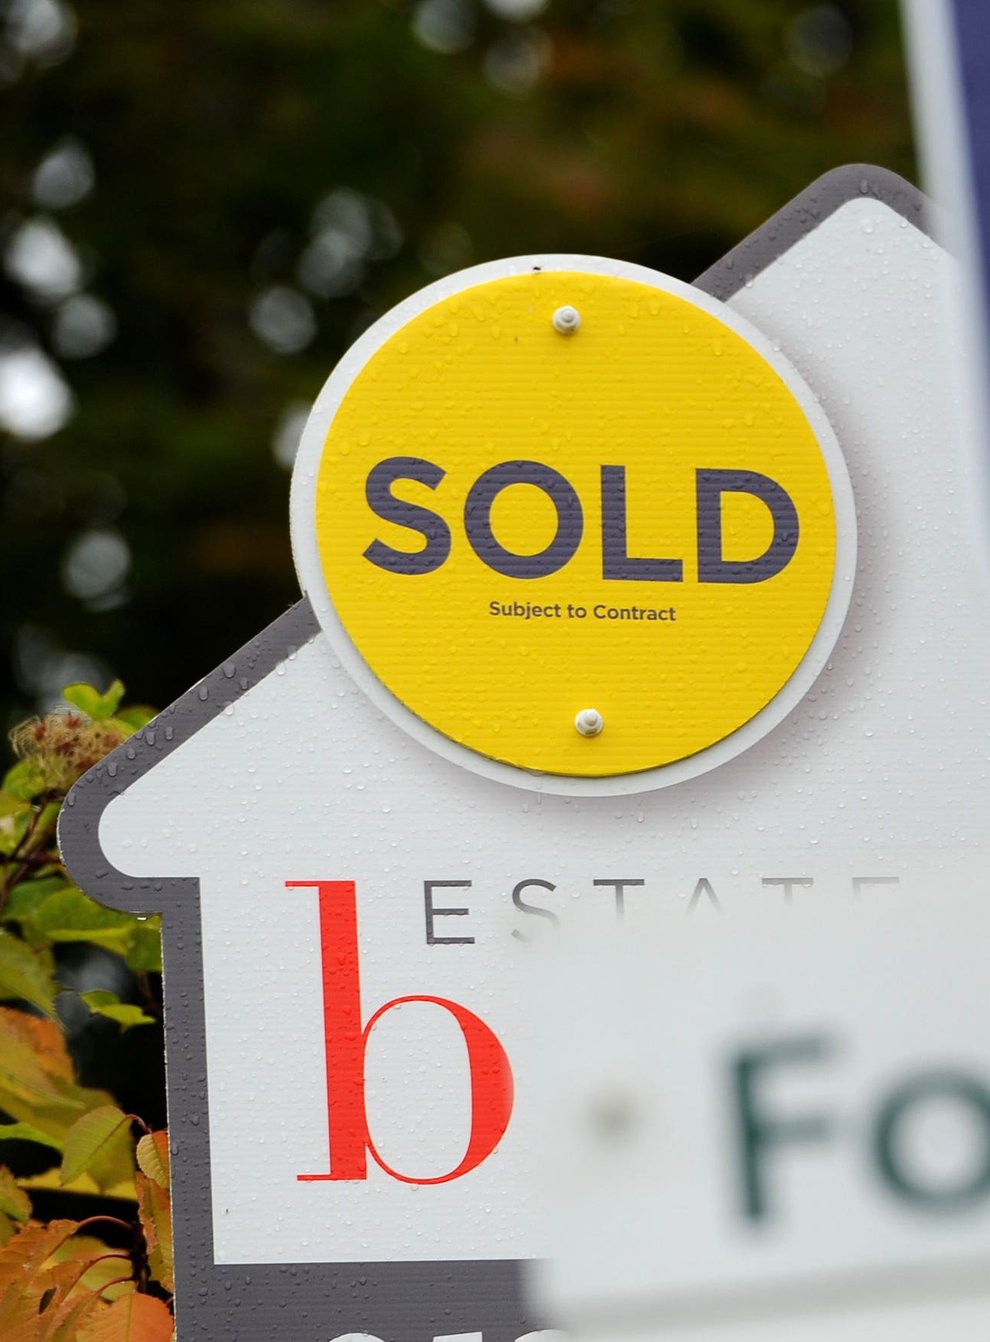 The housing market could be set for a fresh burst of activity after the nil rate stamp duty band was doubled from £125,000 to £250,000 (Andrew Matthews/PA)